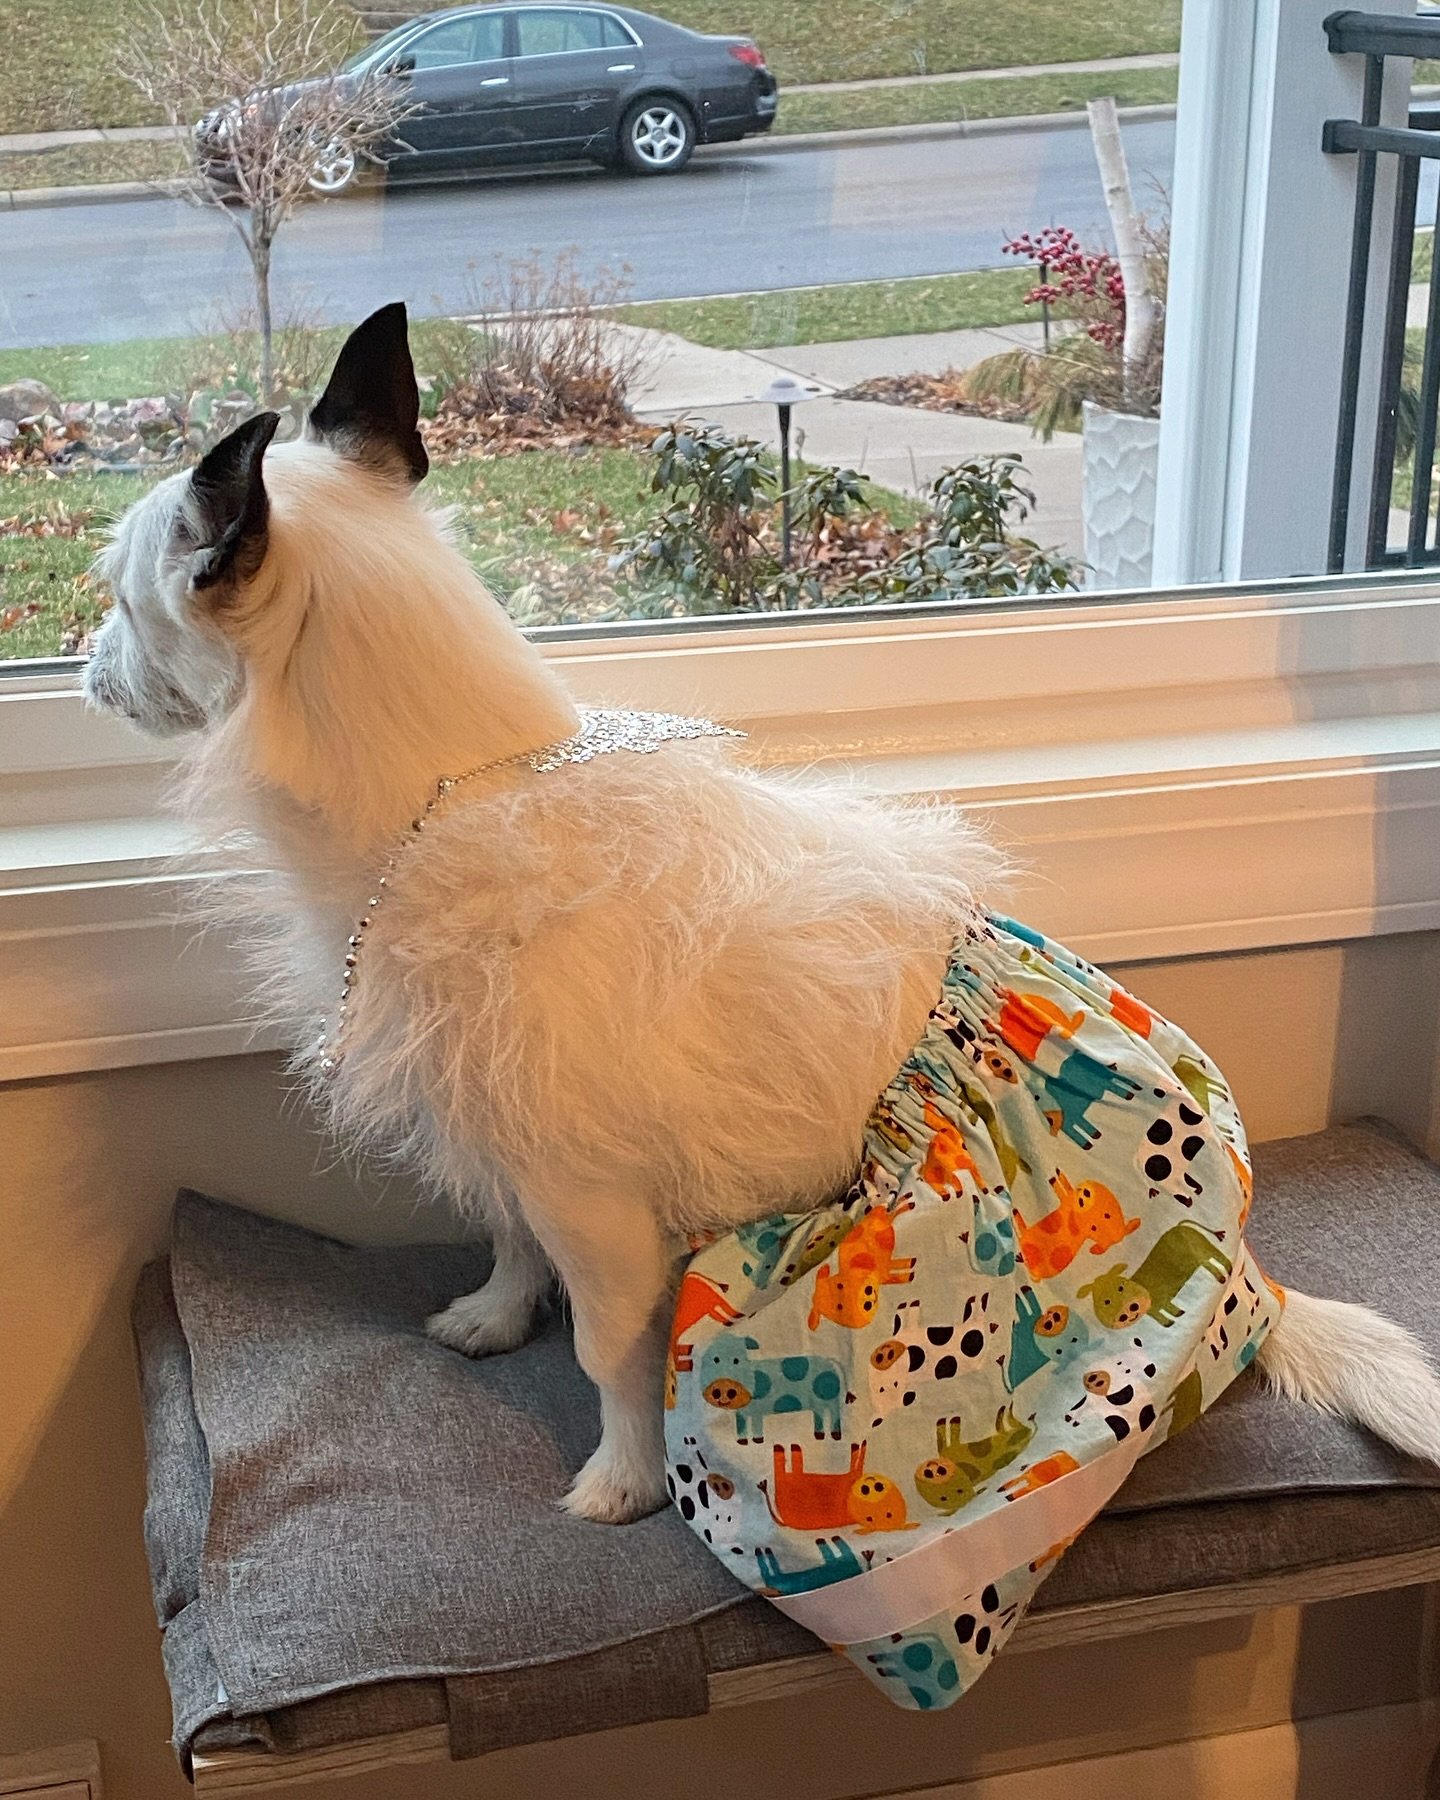 Sofia gave Tolita a glow up this morning with a skirt and necklace. What do you think?
. 
.
.
.
#TolitasWorld #RescueDog #DogsOfInstagram #Dog #JackRussell #JackRussellTerrier #glowup #dogglowup #makeover